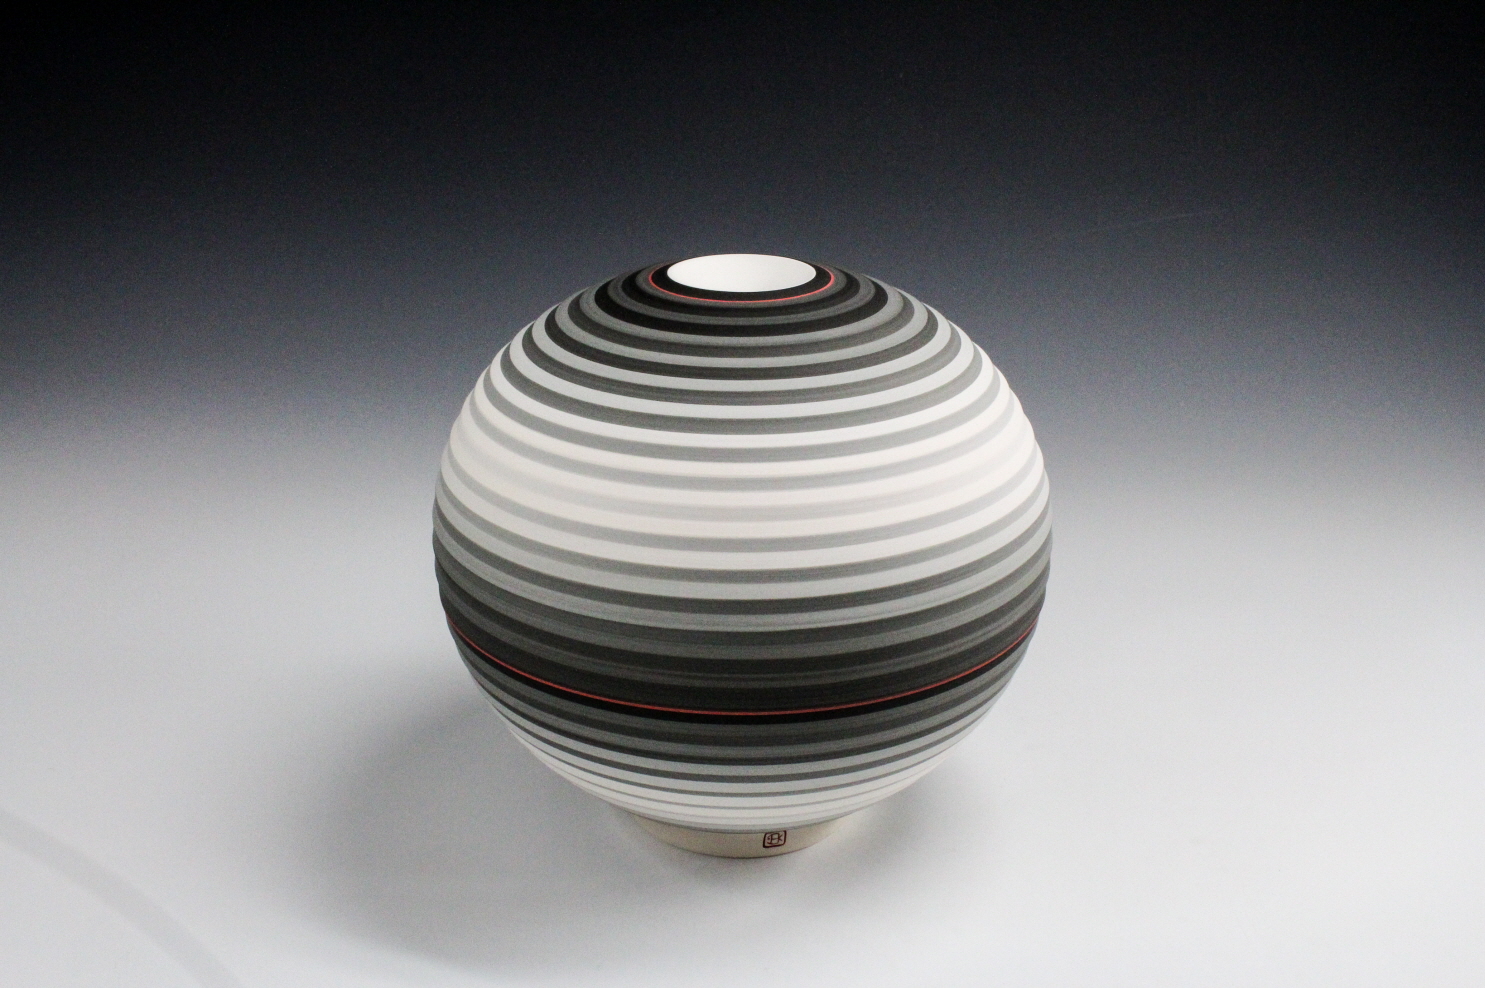 Jin Eui Kim, OPject - Spherical form, Earthenware, 1120ºC Wheel-thrown and brushed 18 tones of engobes, D:18cm×H:19cm, 2016